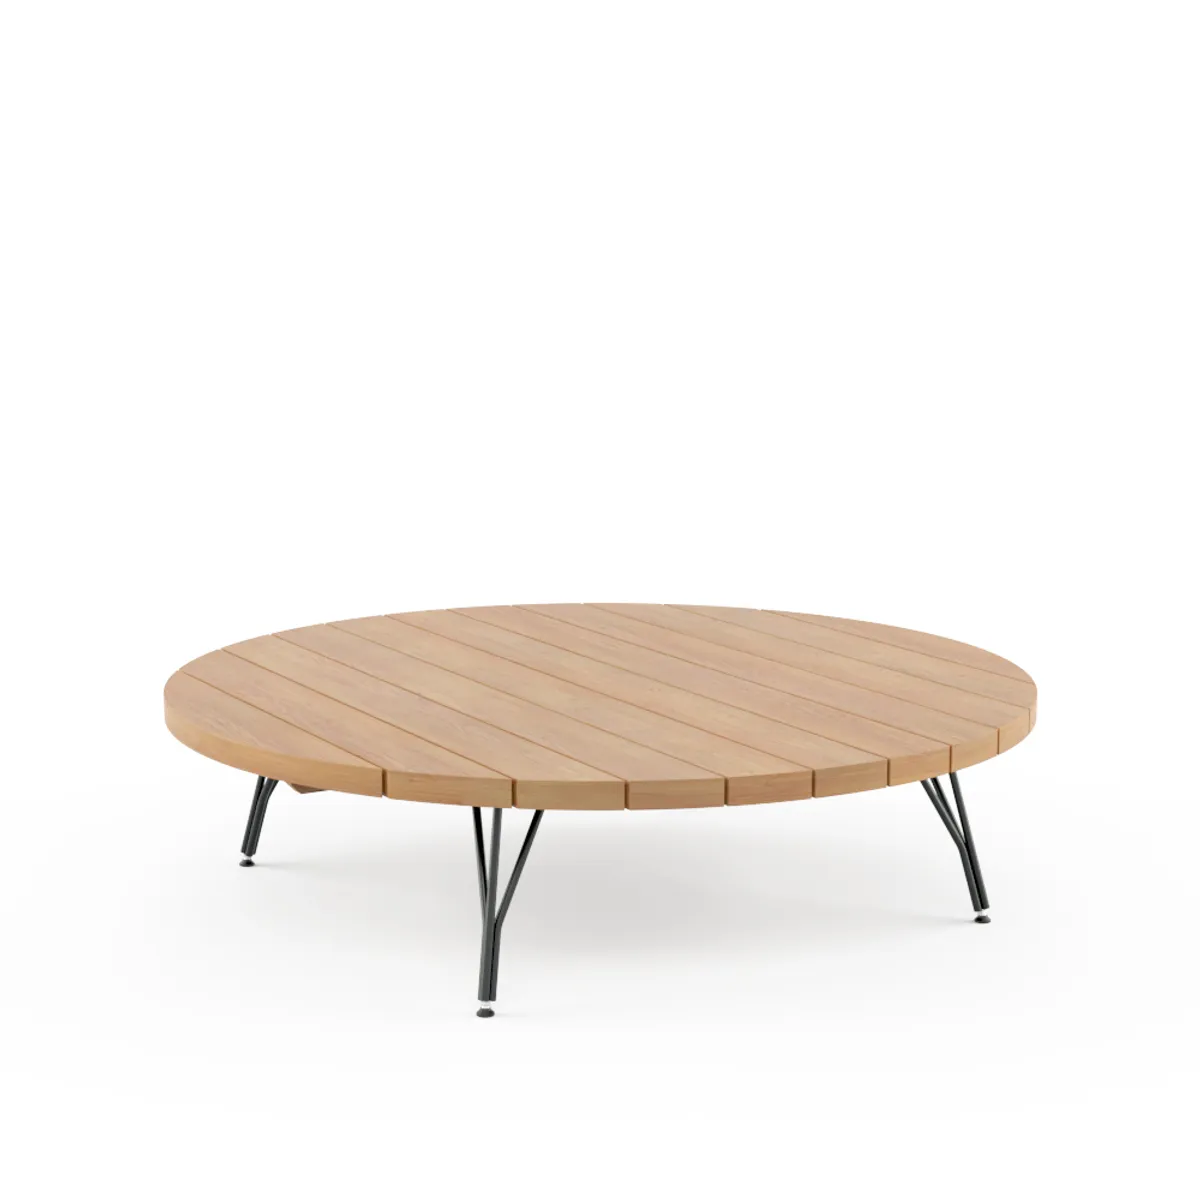 Lavida Coffee Table 1 Inside Out Contracts